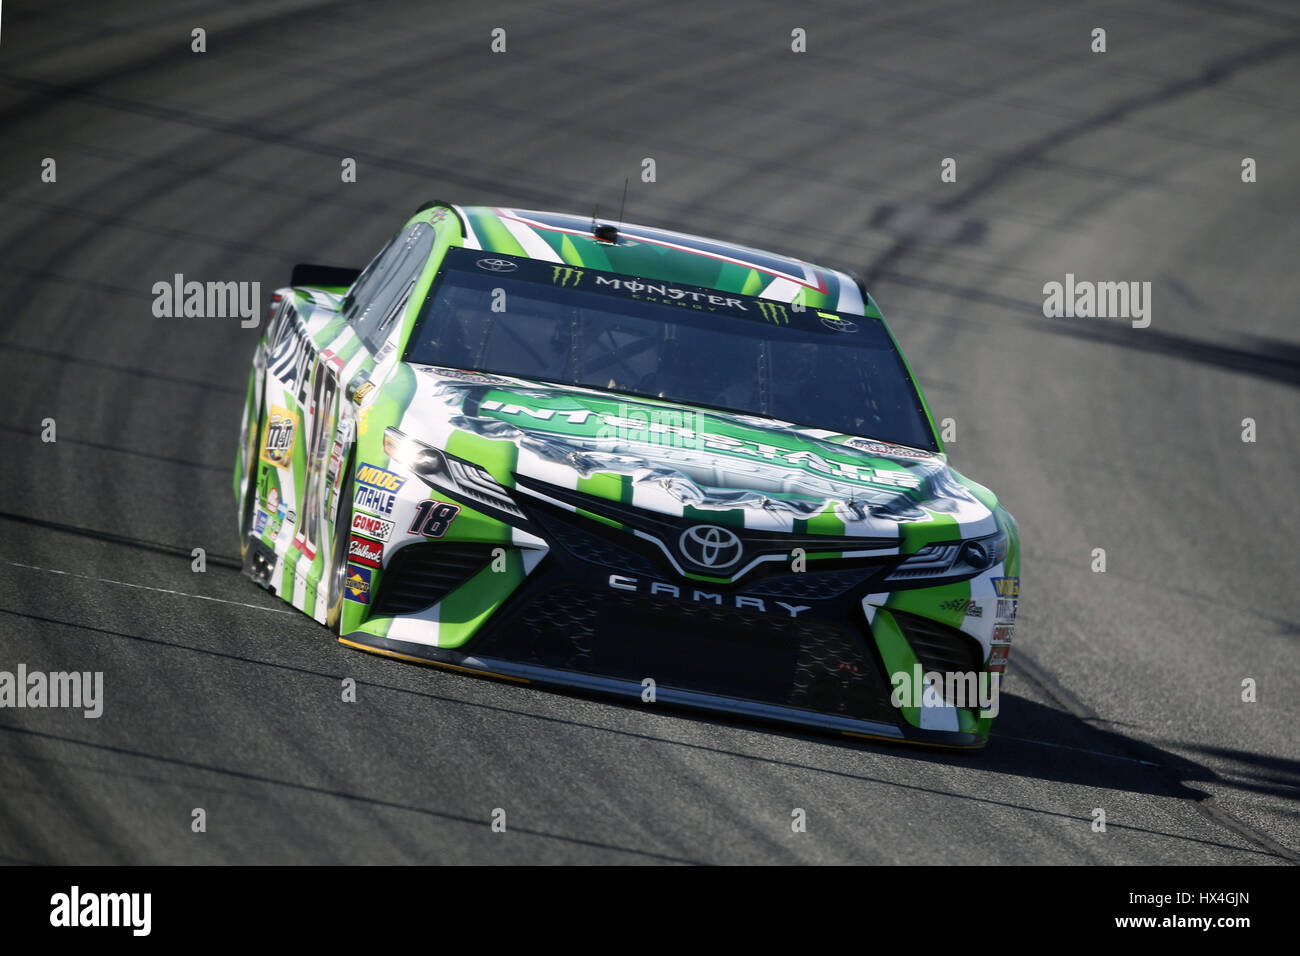 Fontana, California, USA. 24th Mar, 2017. March 24, 2017 - Fontana, California, USA: Kyle Busch (18) takes to the track to practice for the Auto Club 400 at Auto Club Speedway in Fontana, California. Credit: Jusitn R. Noe Asp Inc/ASP/ZUMA Wire/Alamy Live News Stock Photo